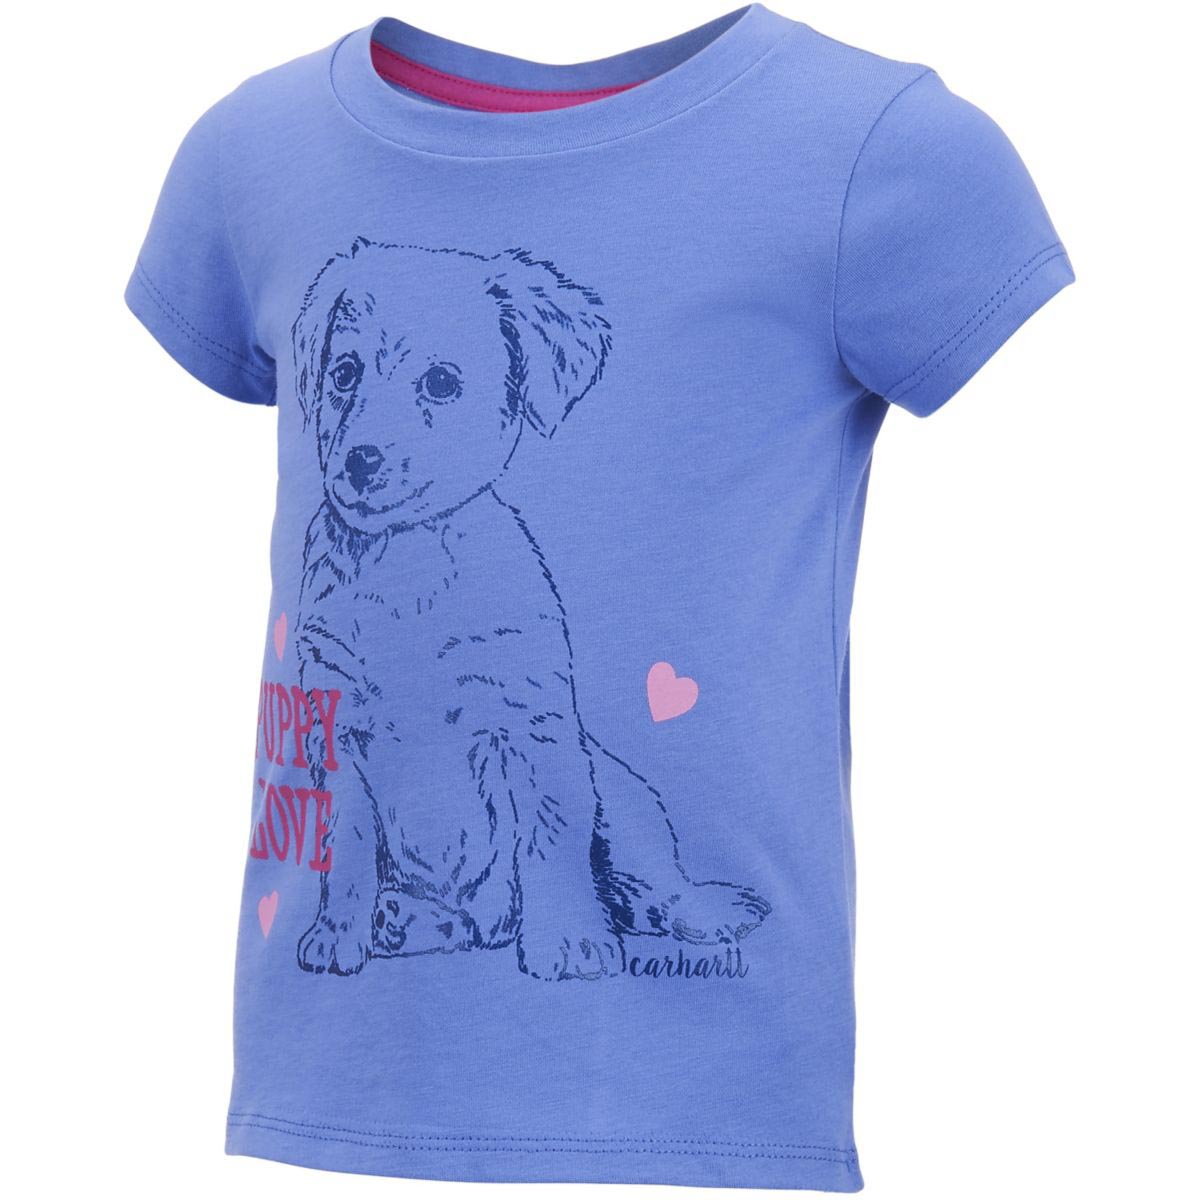 Carhartt Infant and Toddler Girls' Puppy Love Tee